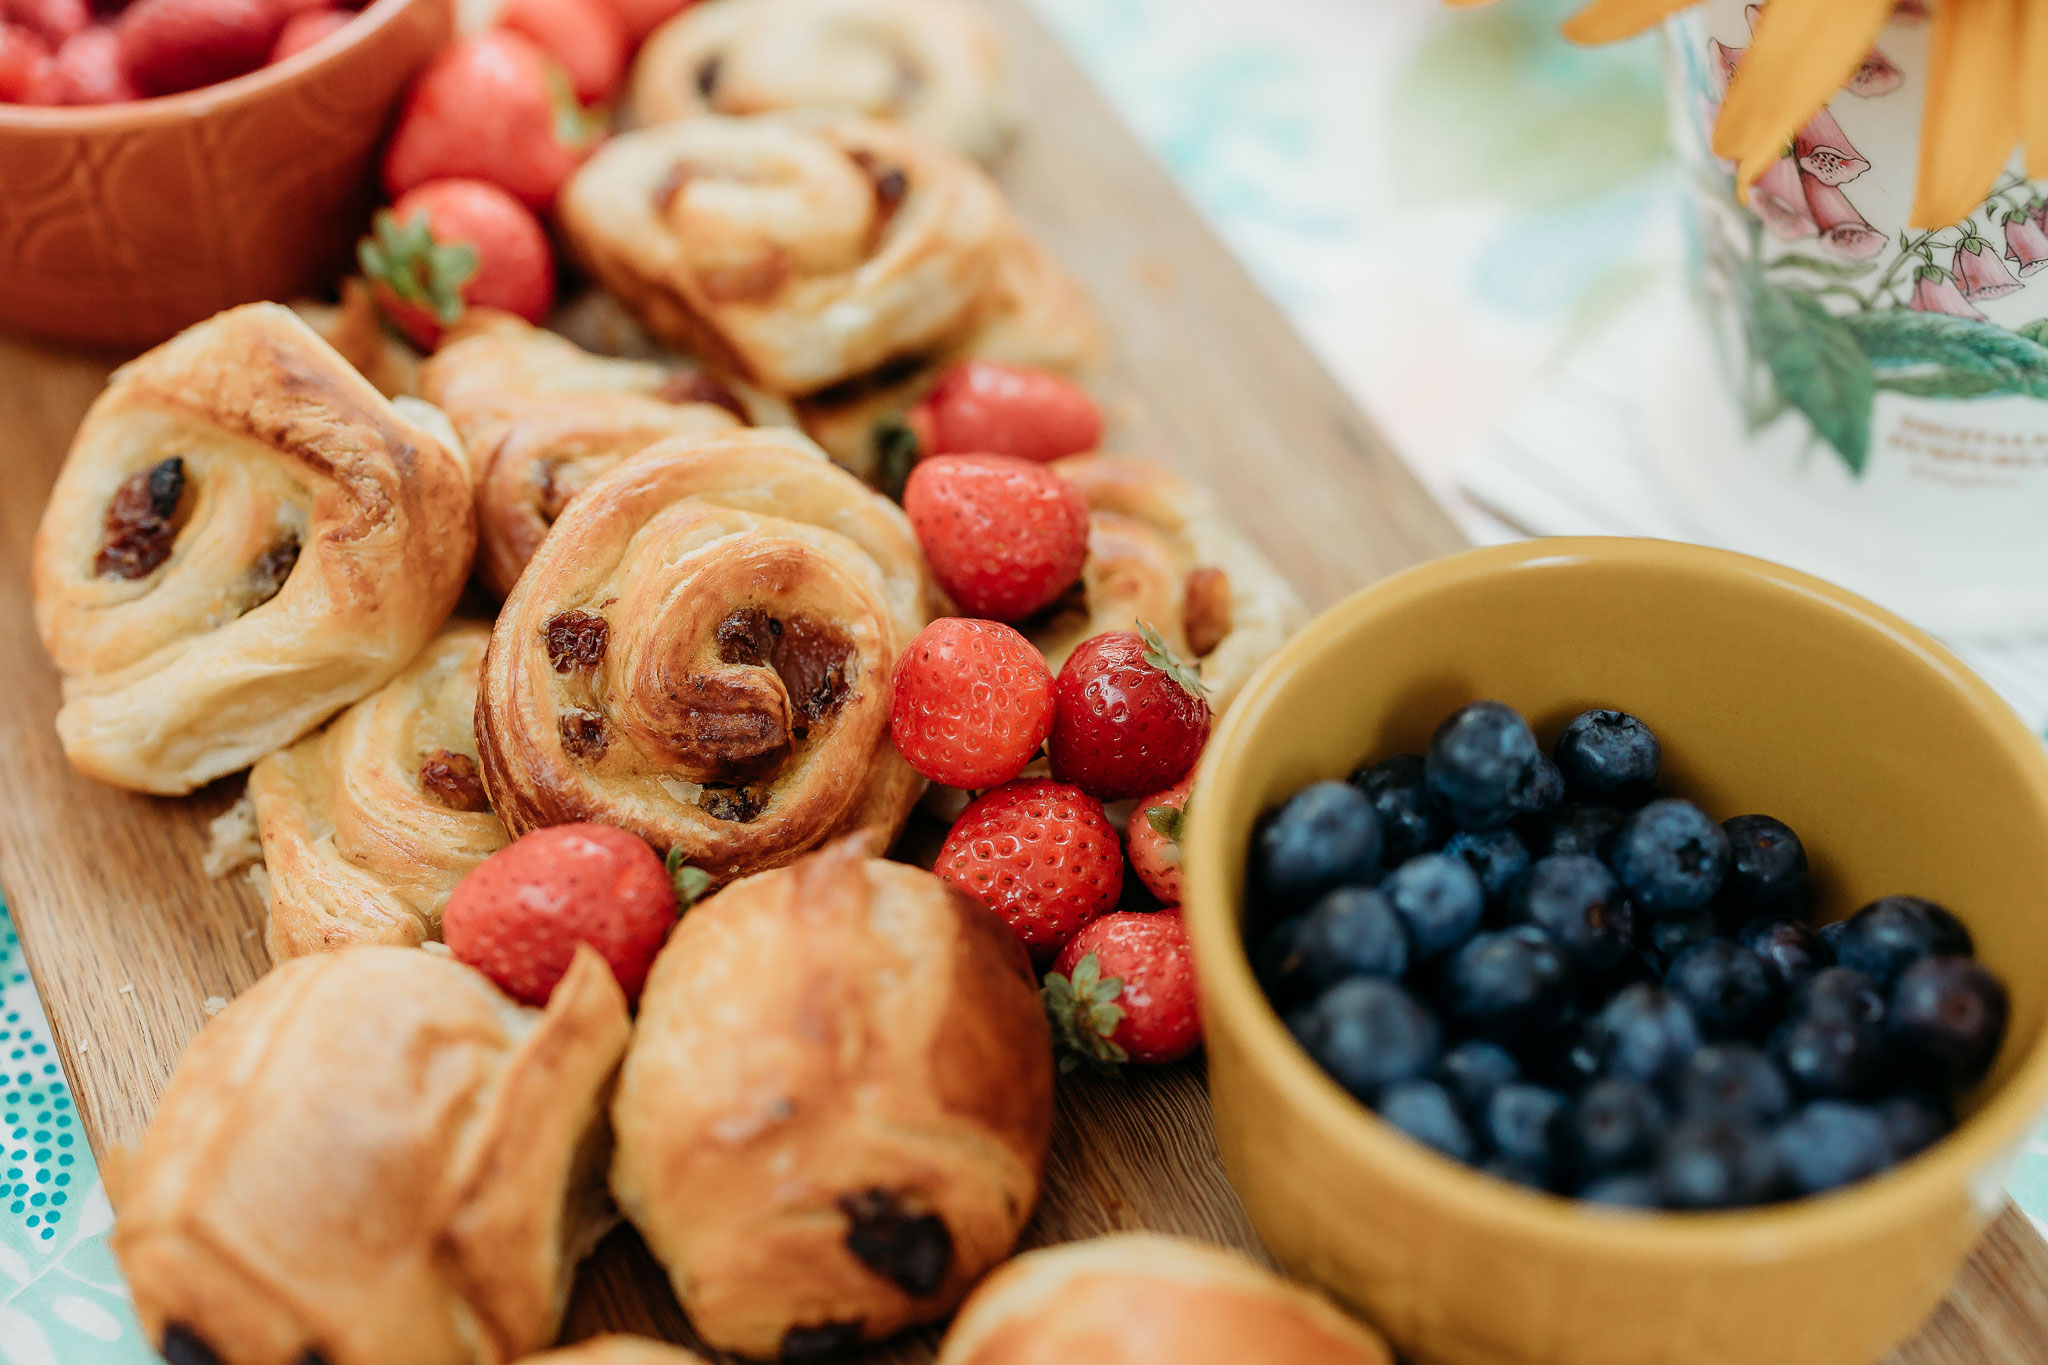 fruit and French pastries for breakfast!